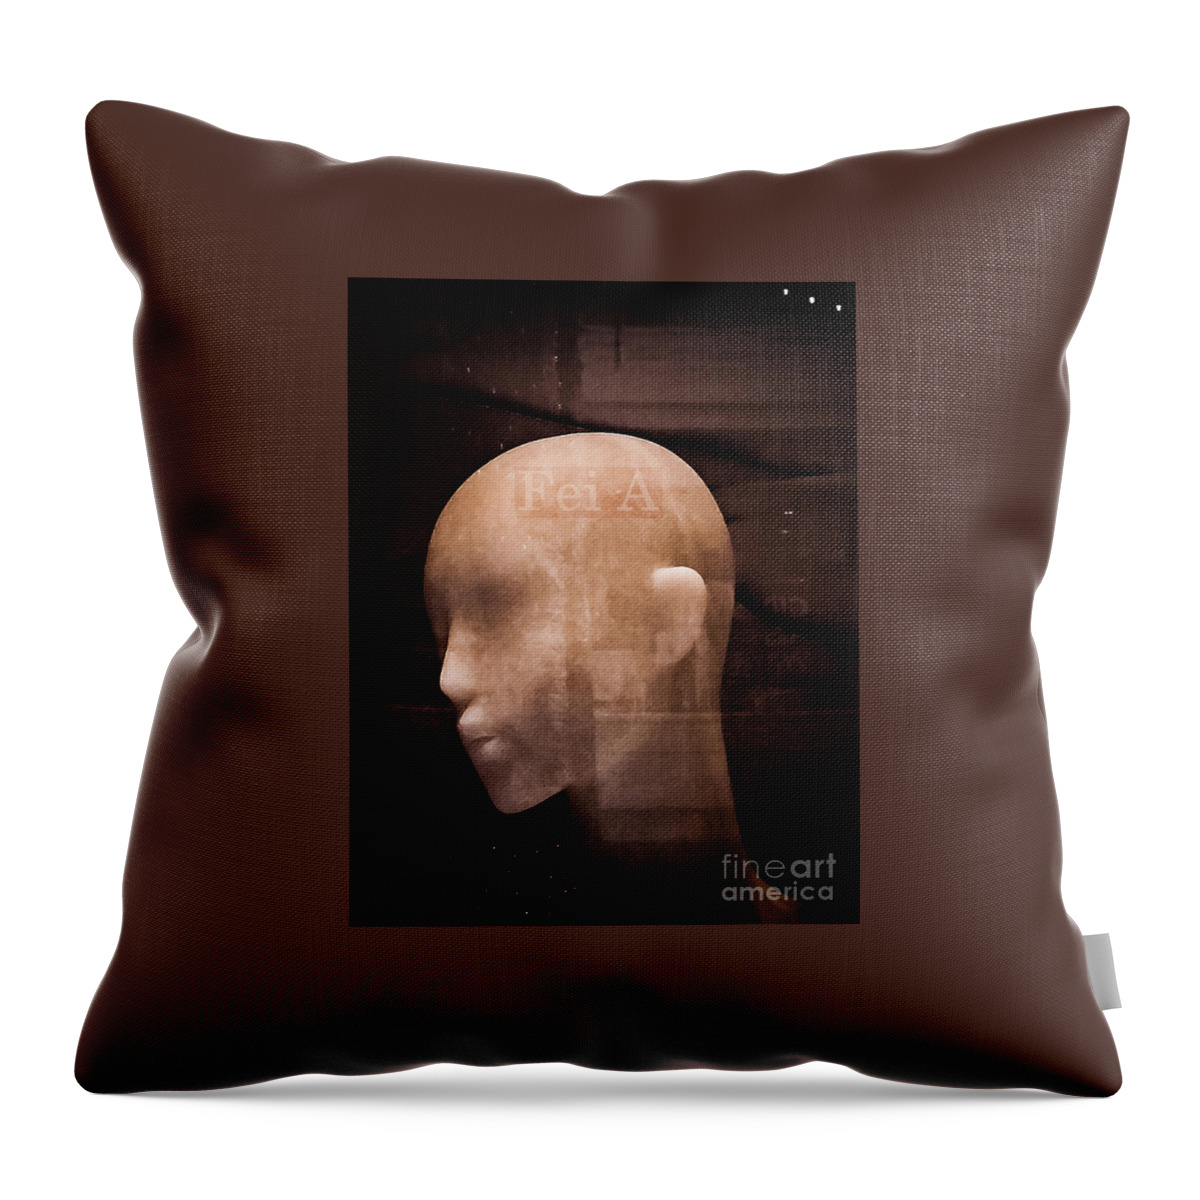 Digital Throw Pillow featuring the digital art Once Upon A Time #2 by Fei A